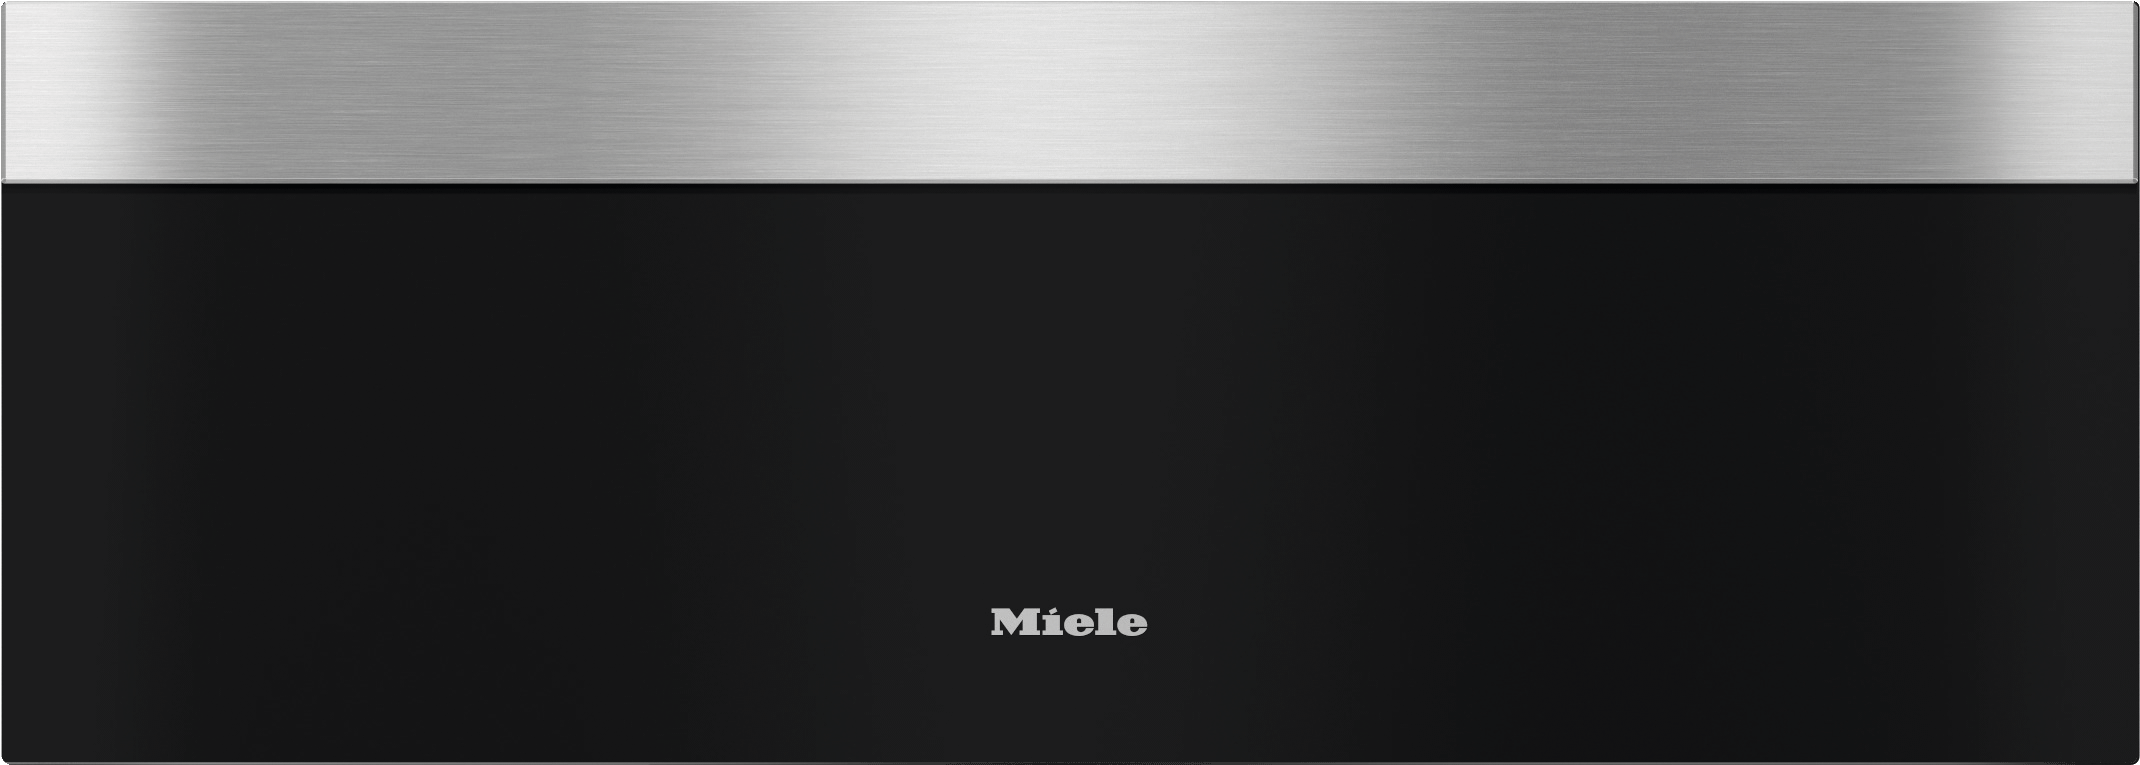 Miele ESW7680 STAINLESS STEEL   Handleless Gourmet Warming Drawer, 30-